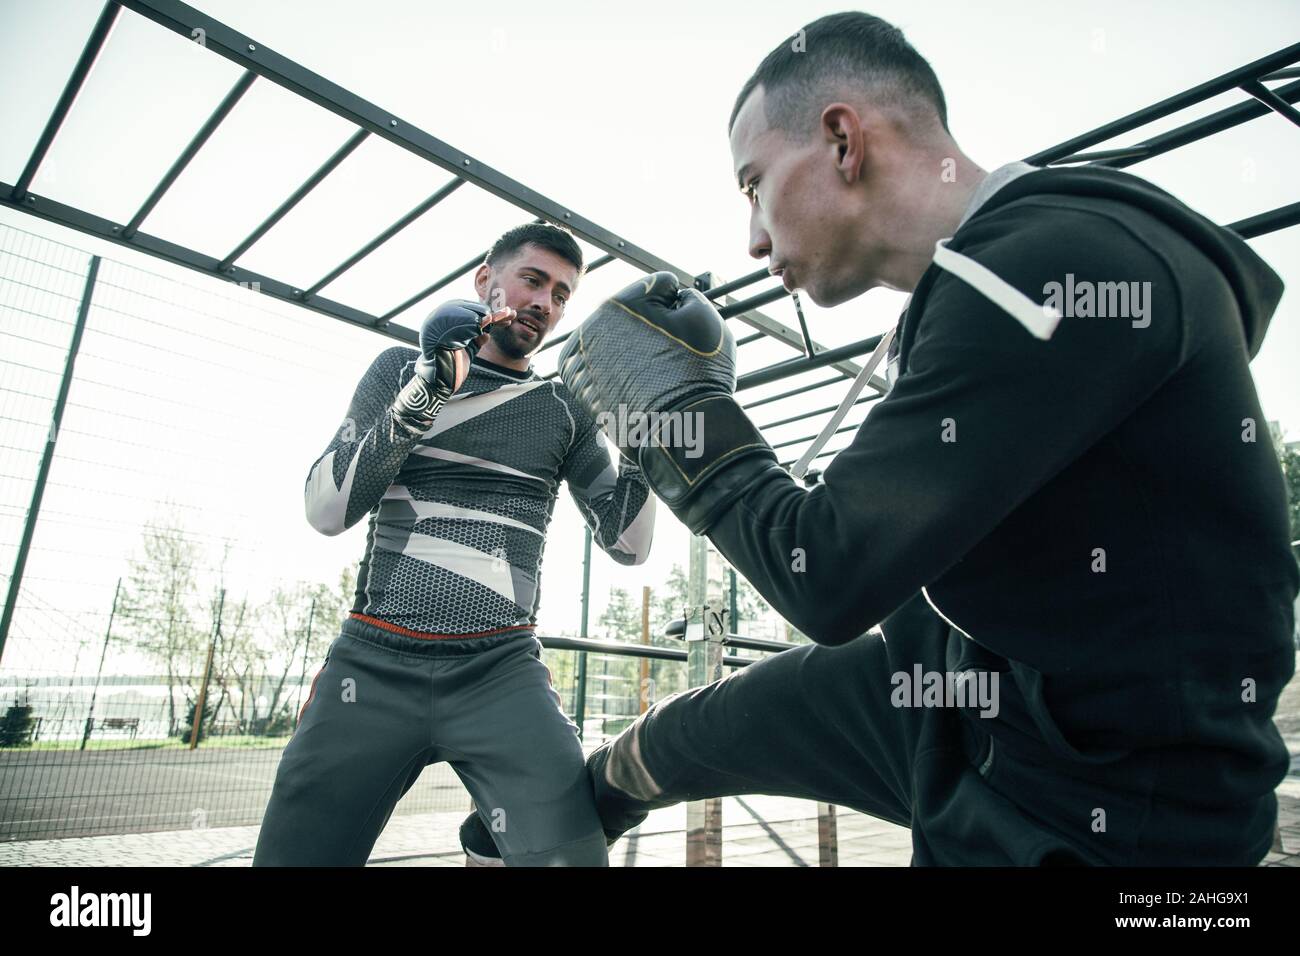 Two boxers looking serious while fighting outdoors at the training Stock Photo